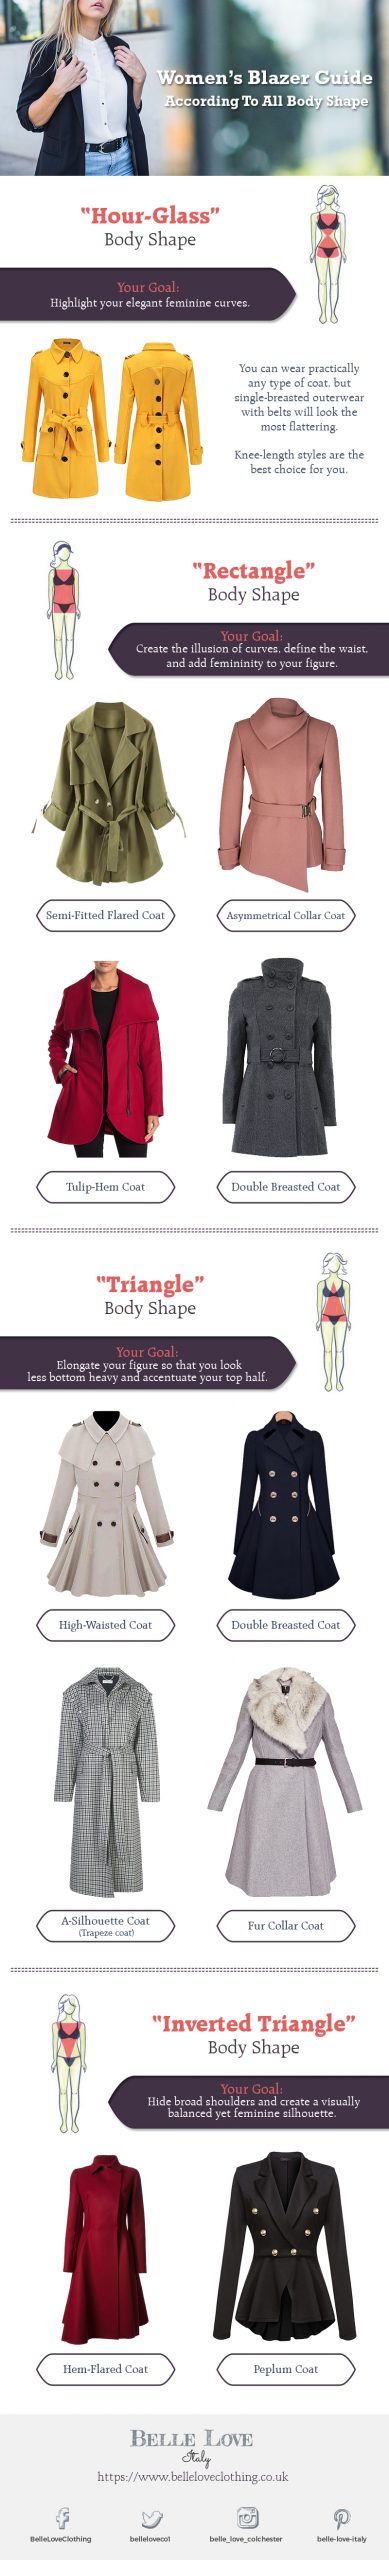 Womens Blazer Guide According to ALL Body Shape scaled